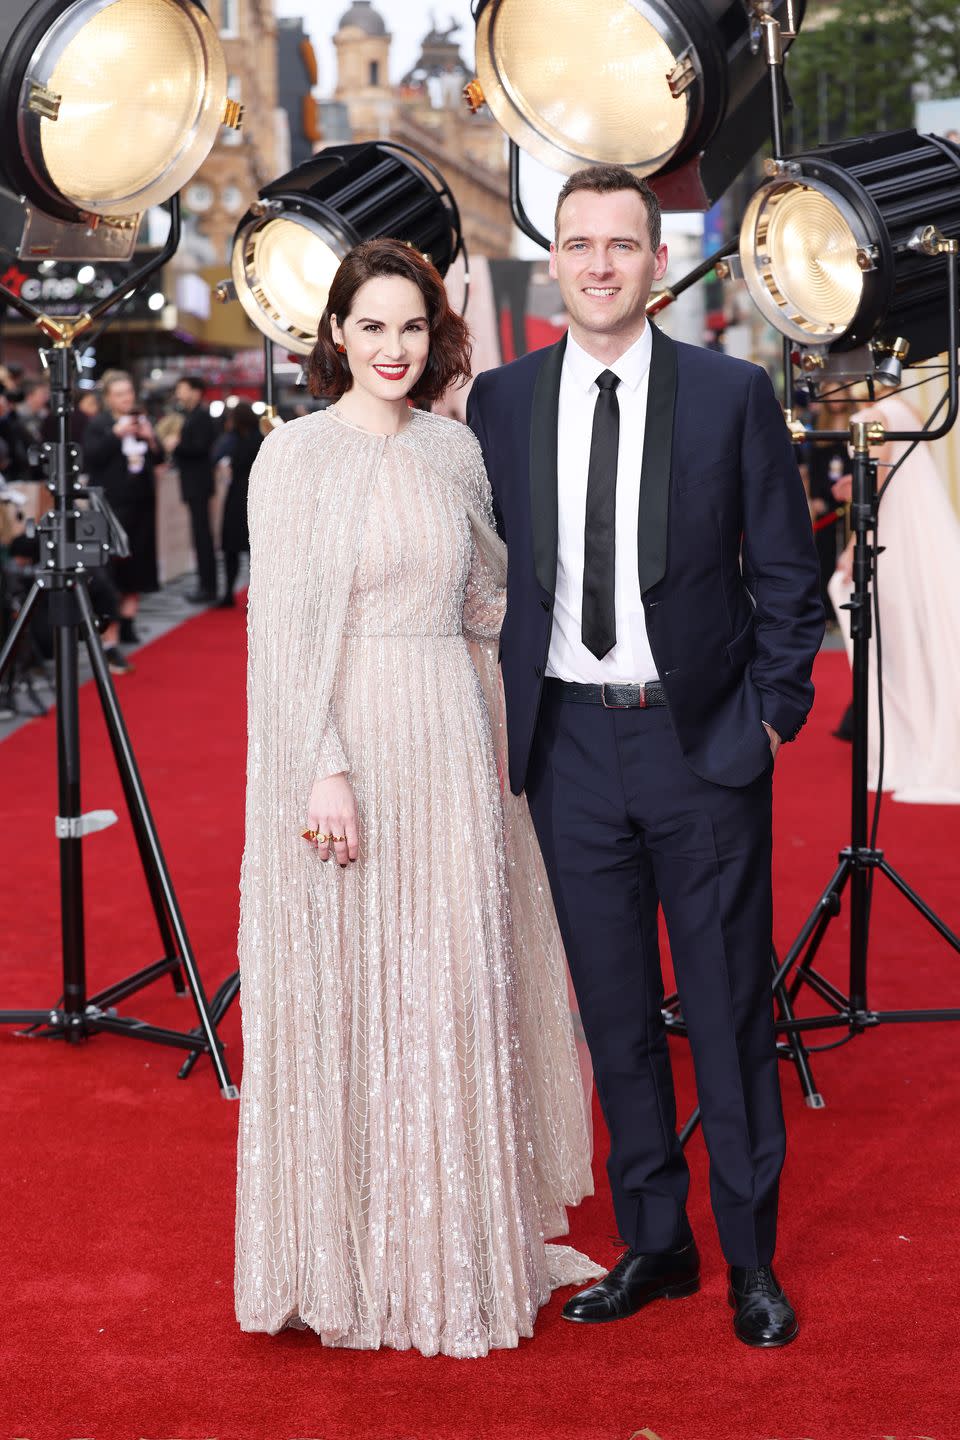 michelle dockery and jasper waller bridge stand smiling at the camera on the red carpet, she wears a long sequined gown and he a black suit